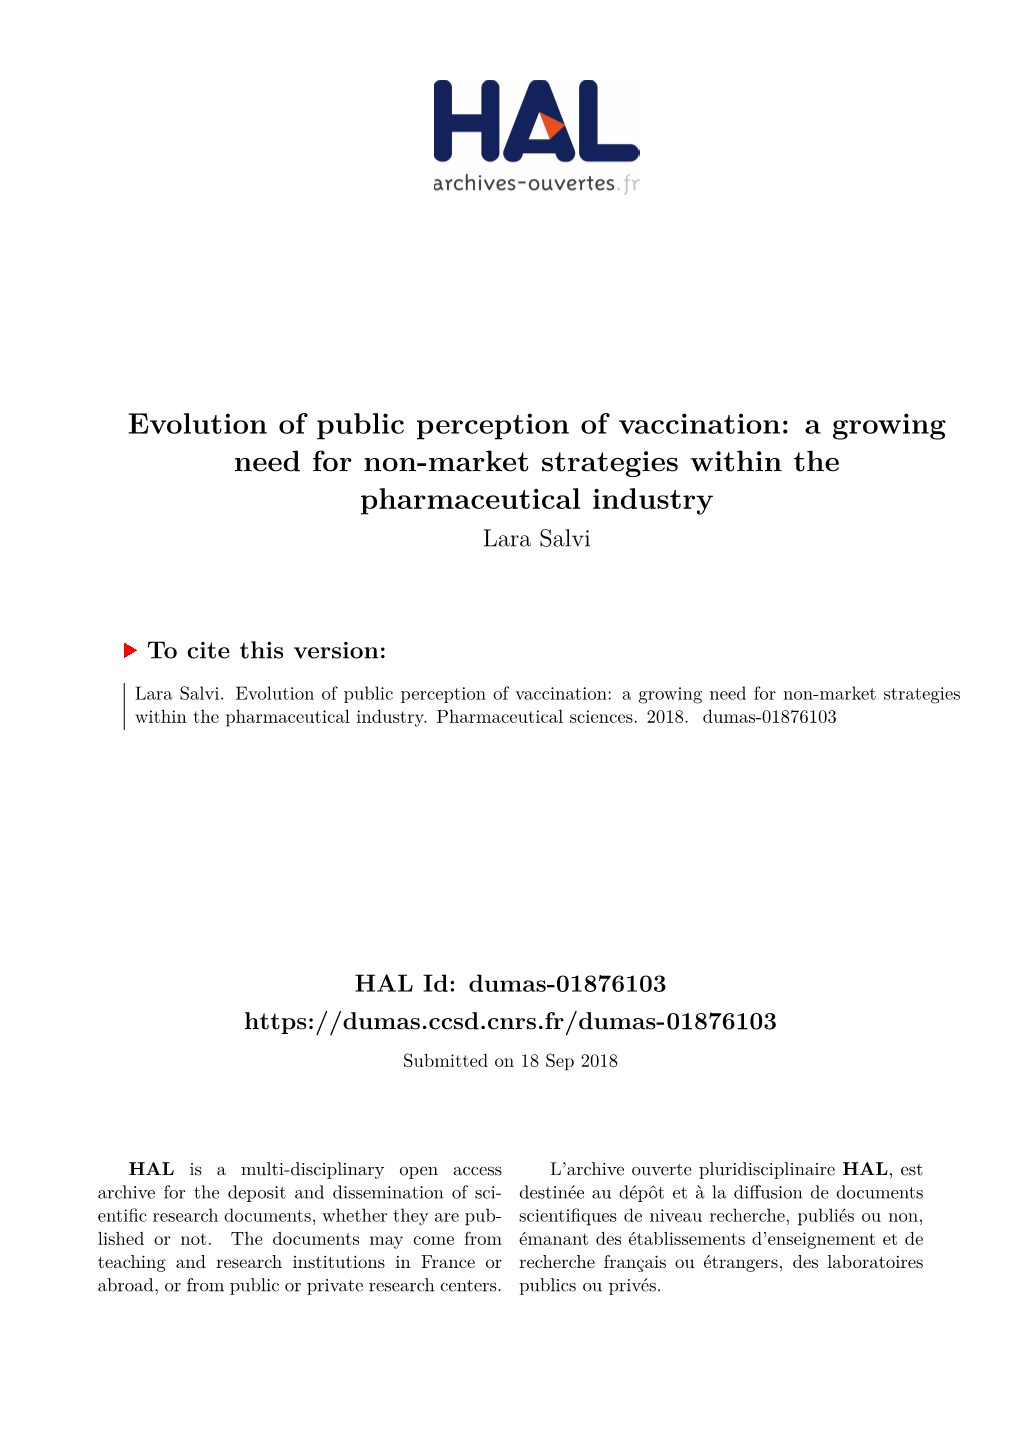 Evolution of Public Perception of Vaccination: a Growing Need for Non-Market Strategies Within the Pharmaceutical Industry Lara Salvi